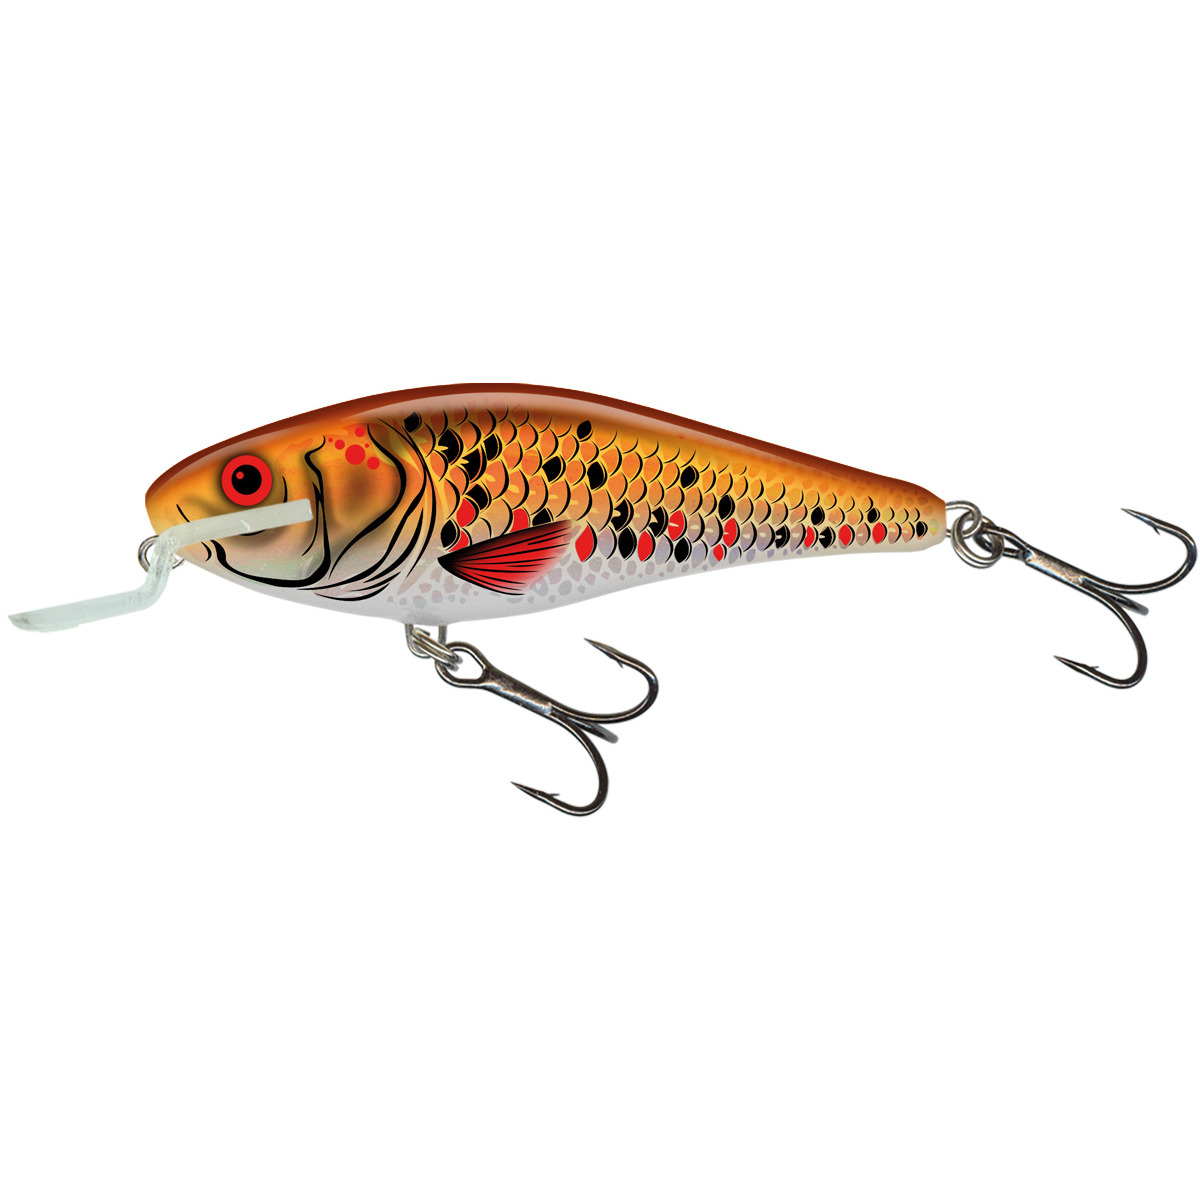 Salmo Executor Shallow Runner Floating 9cm - Holographic Golden Back